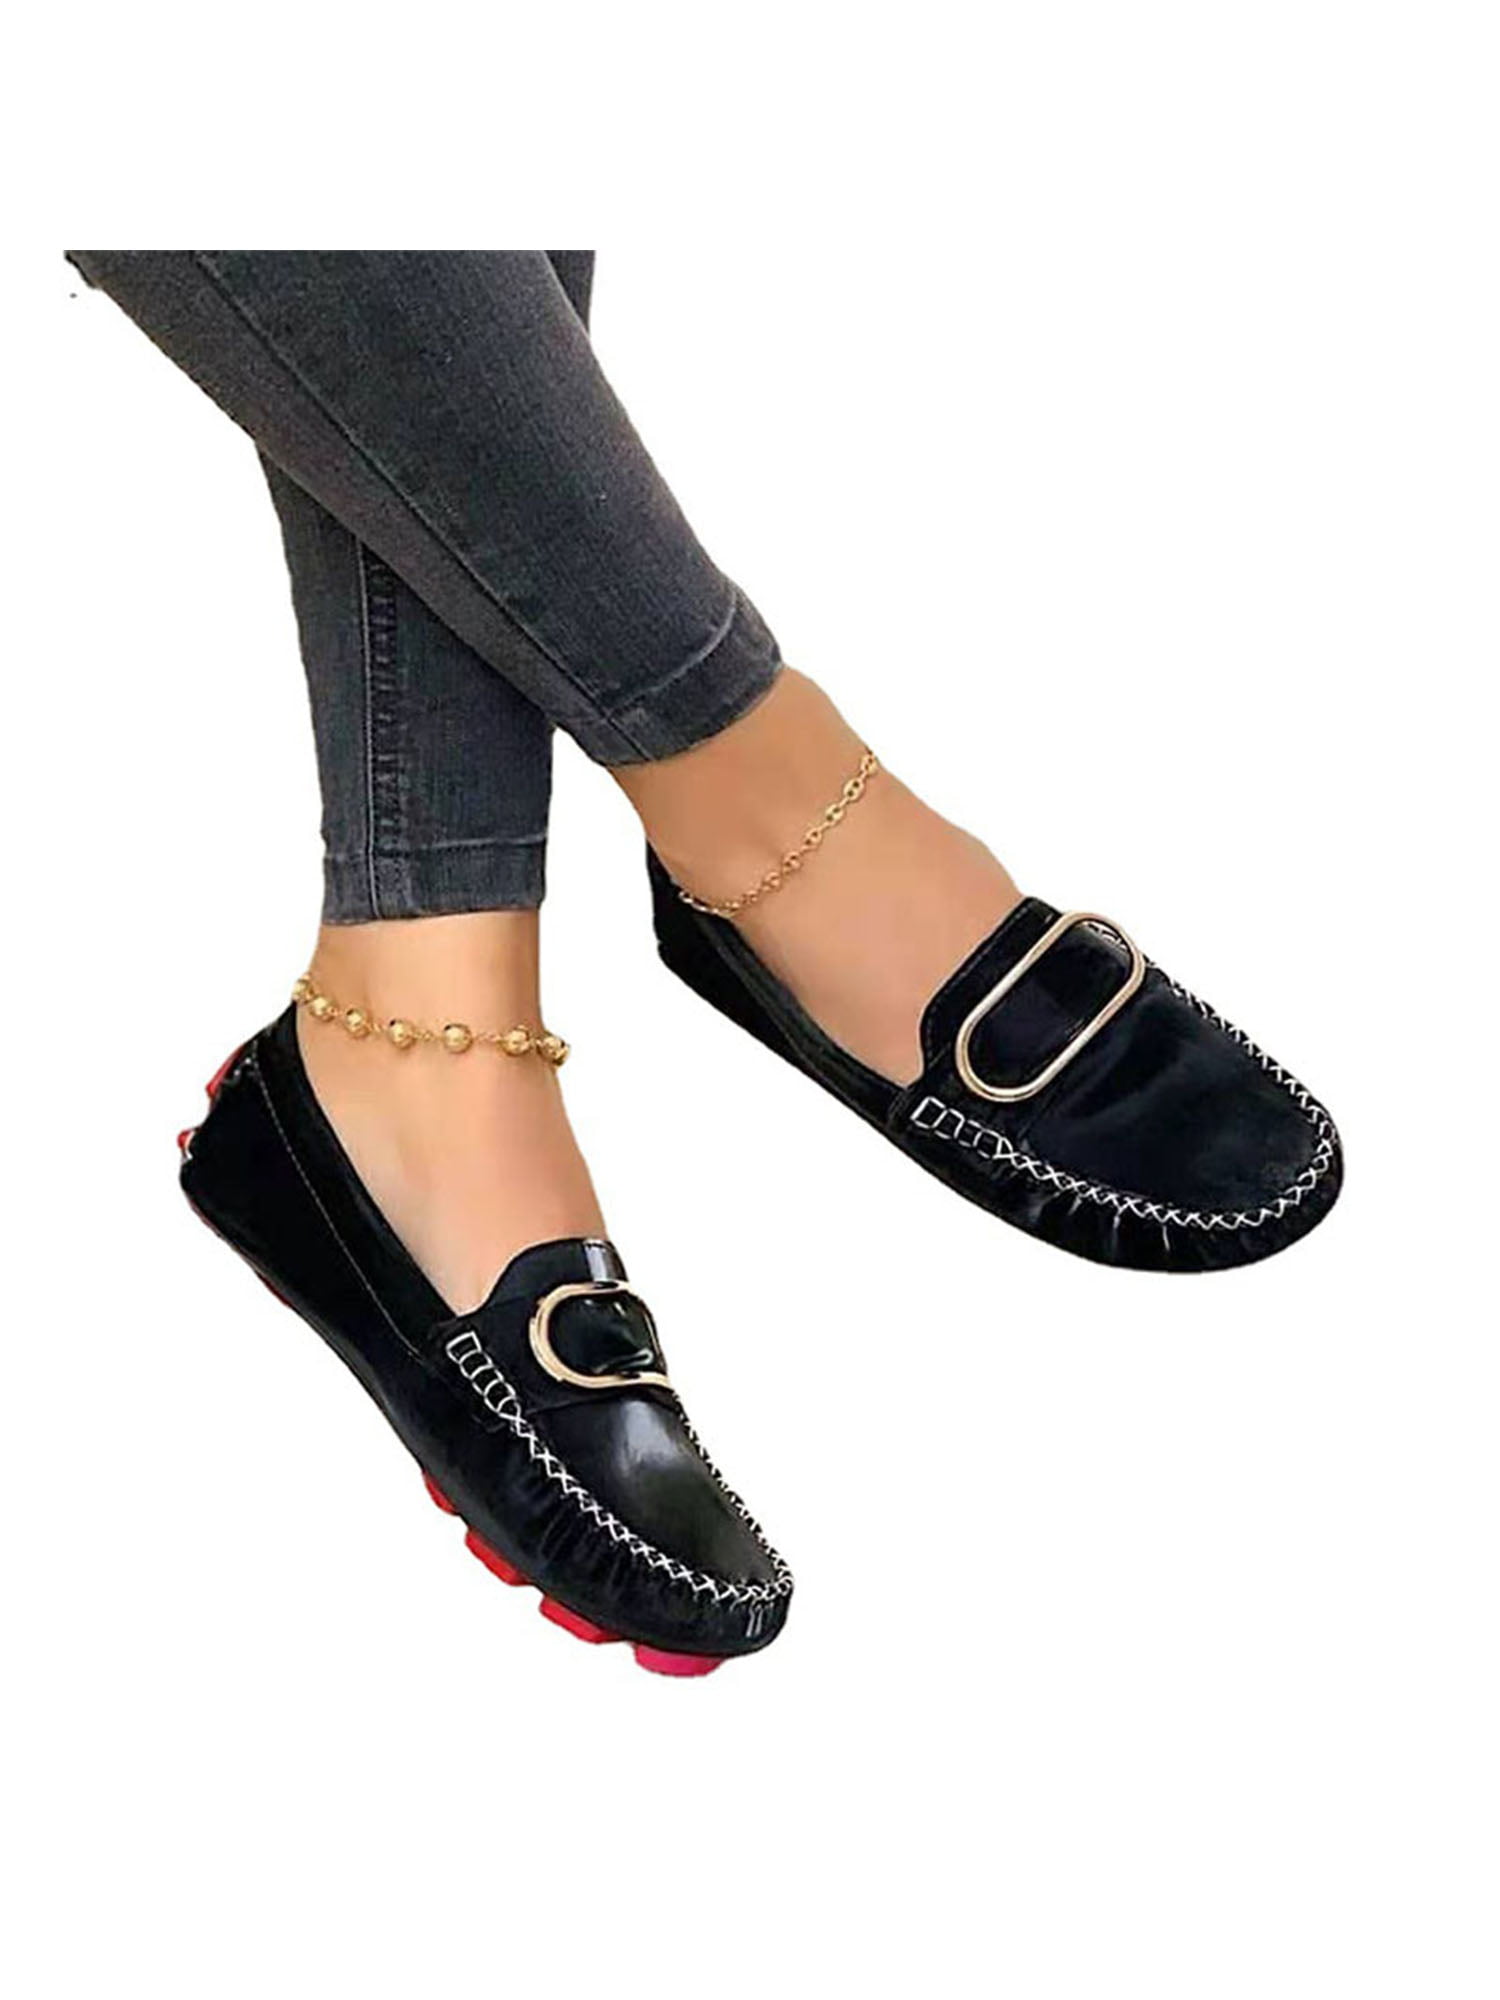 Ladies Moccasins Women Bowknot Deck Casual Boat Loafers Slip On Comfort Shoes